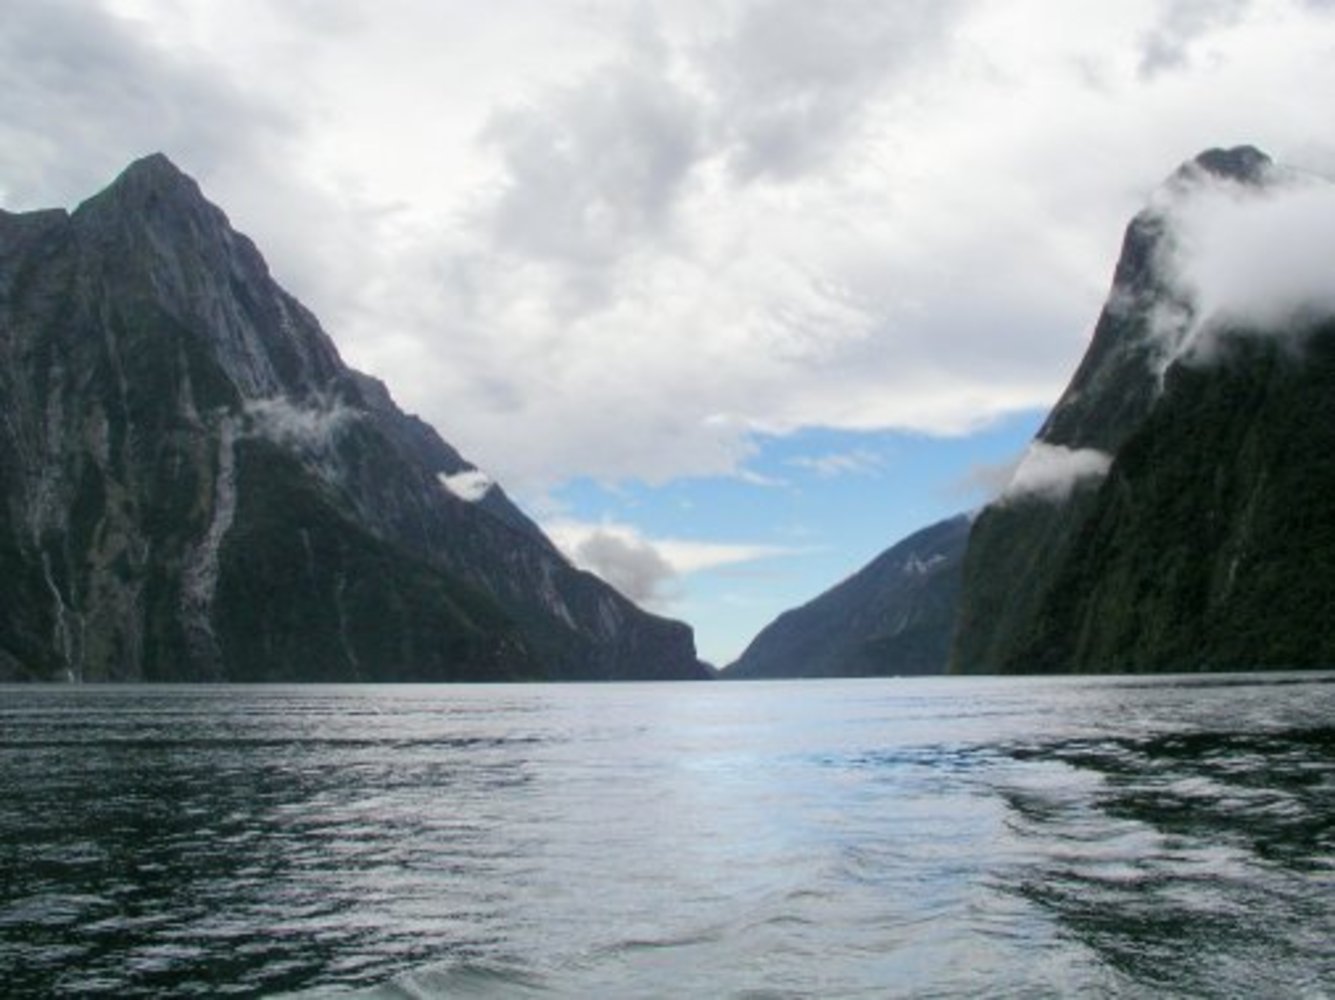 Photograph of Milford Sound, New Zealand